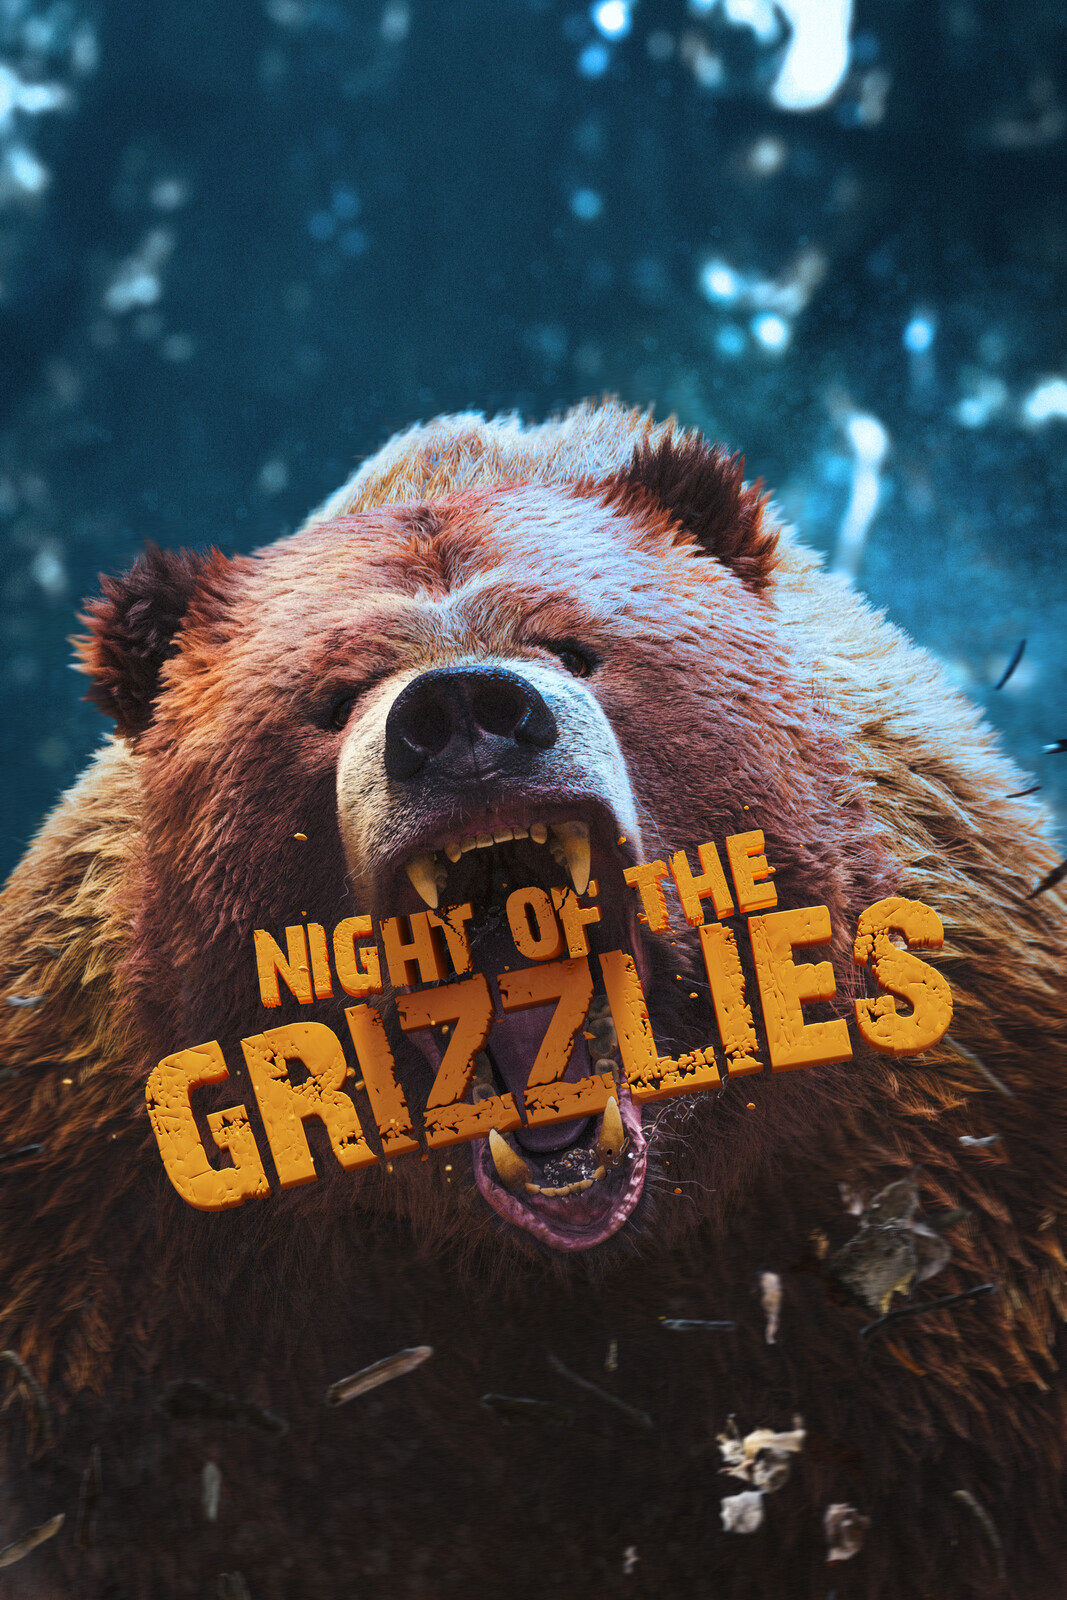 Night of the Grizzlies